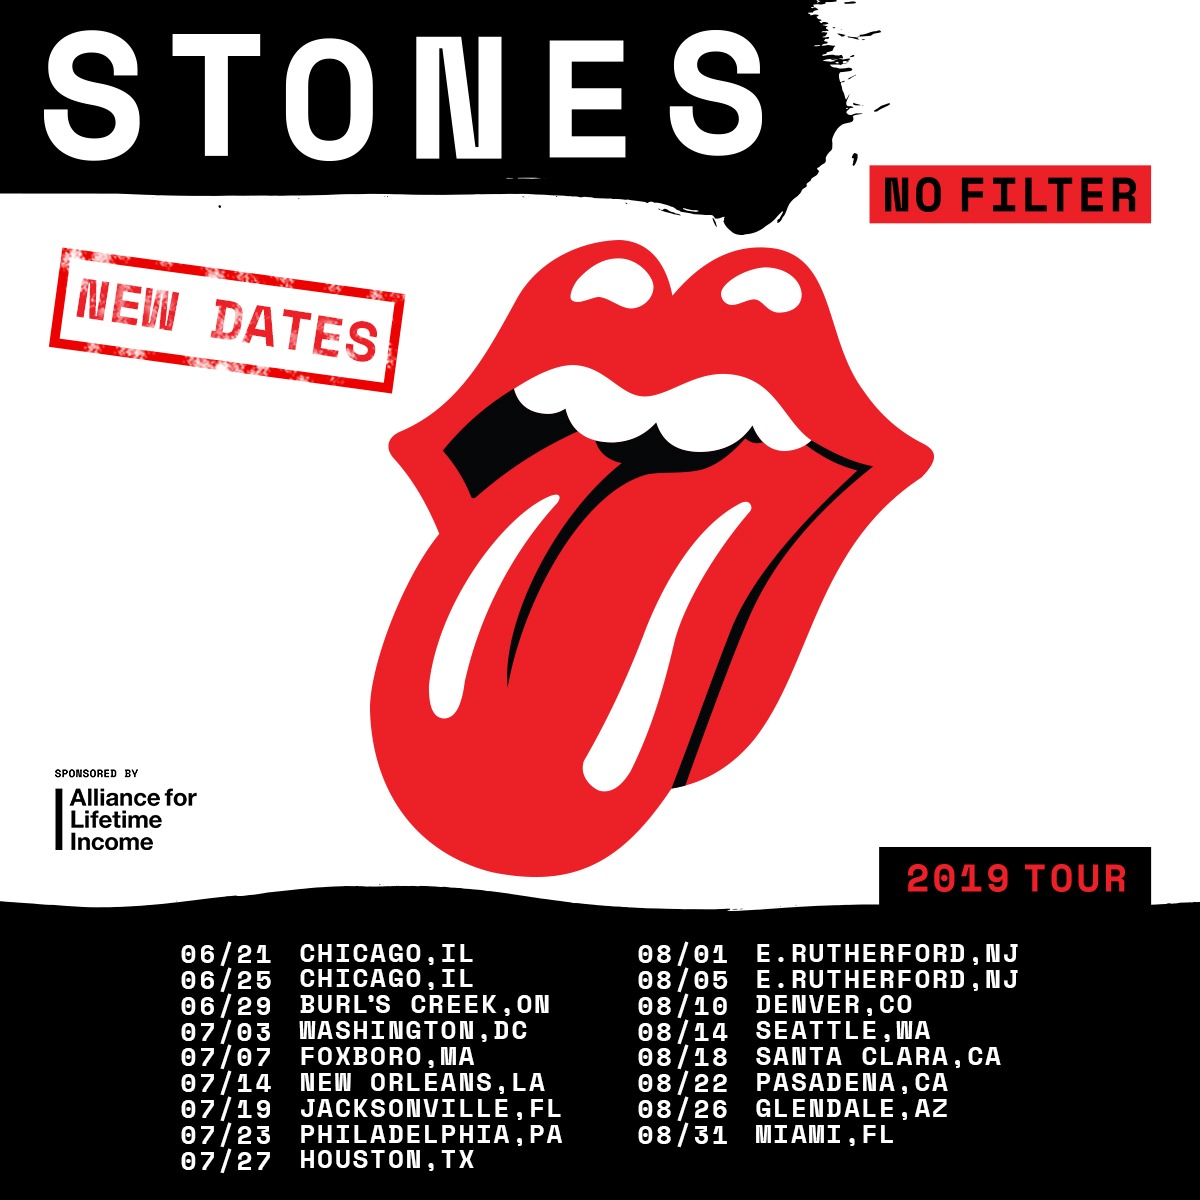 The Rolling Stones Announce Re-Scheduled North American Tour Start Me Up In June to August 2019